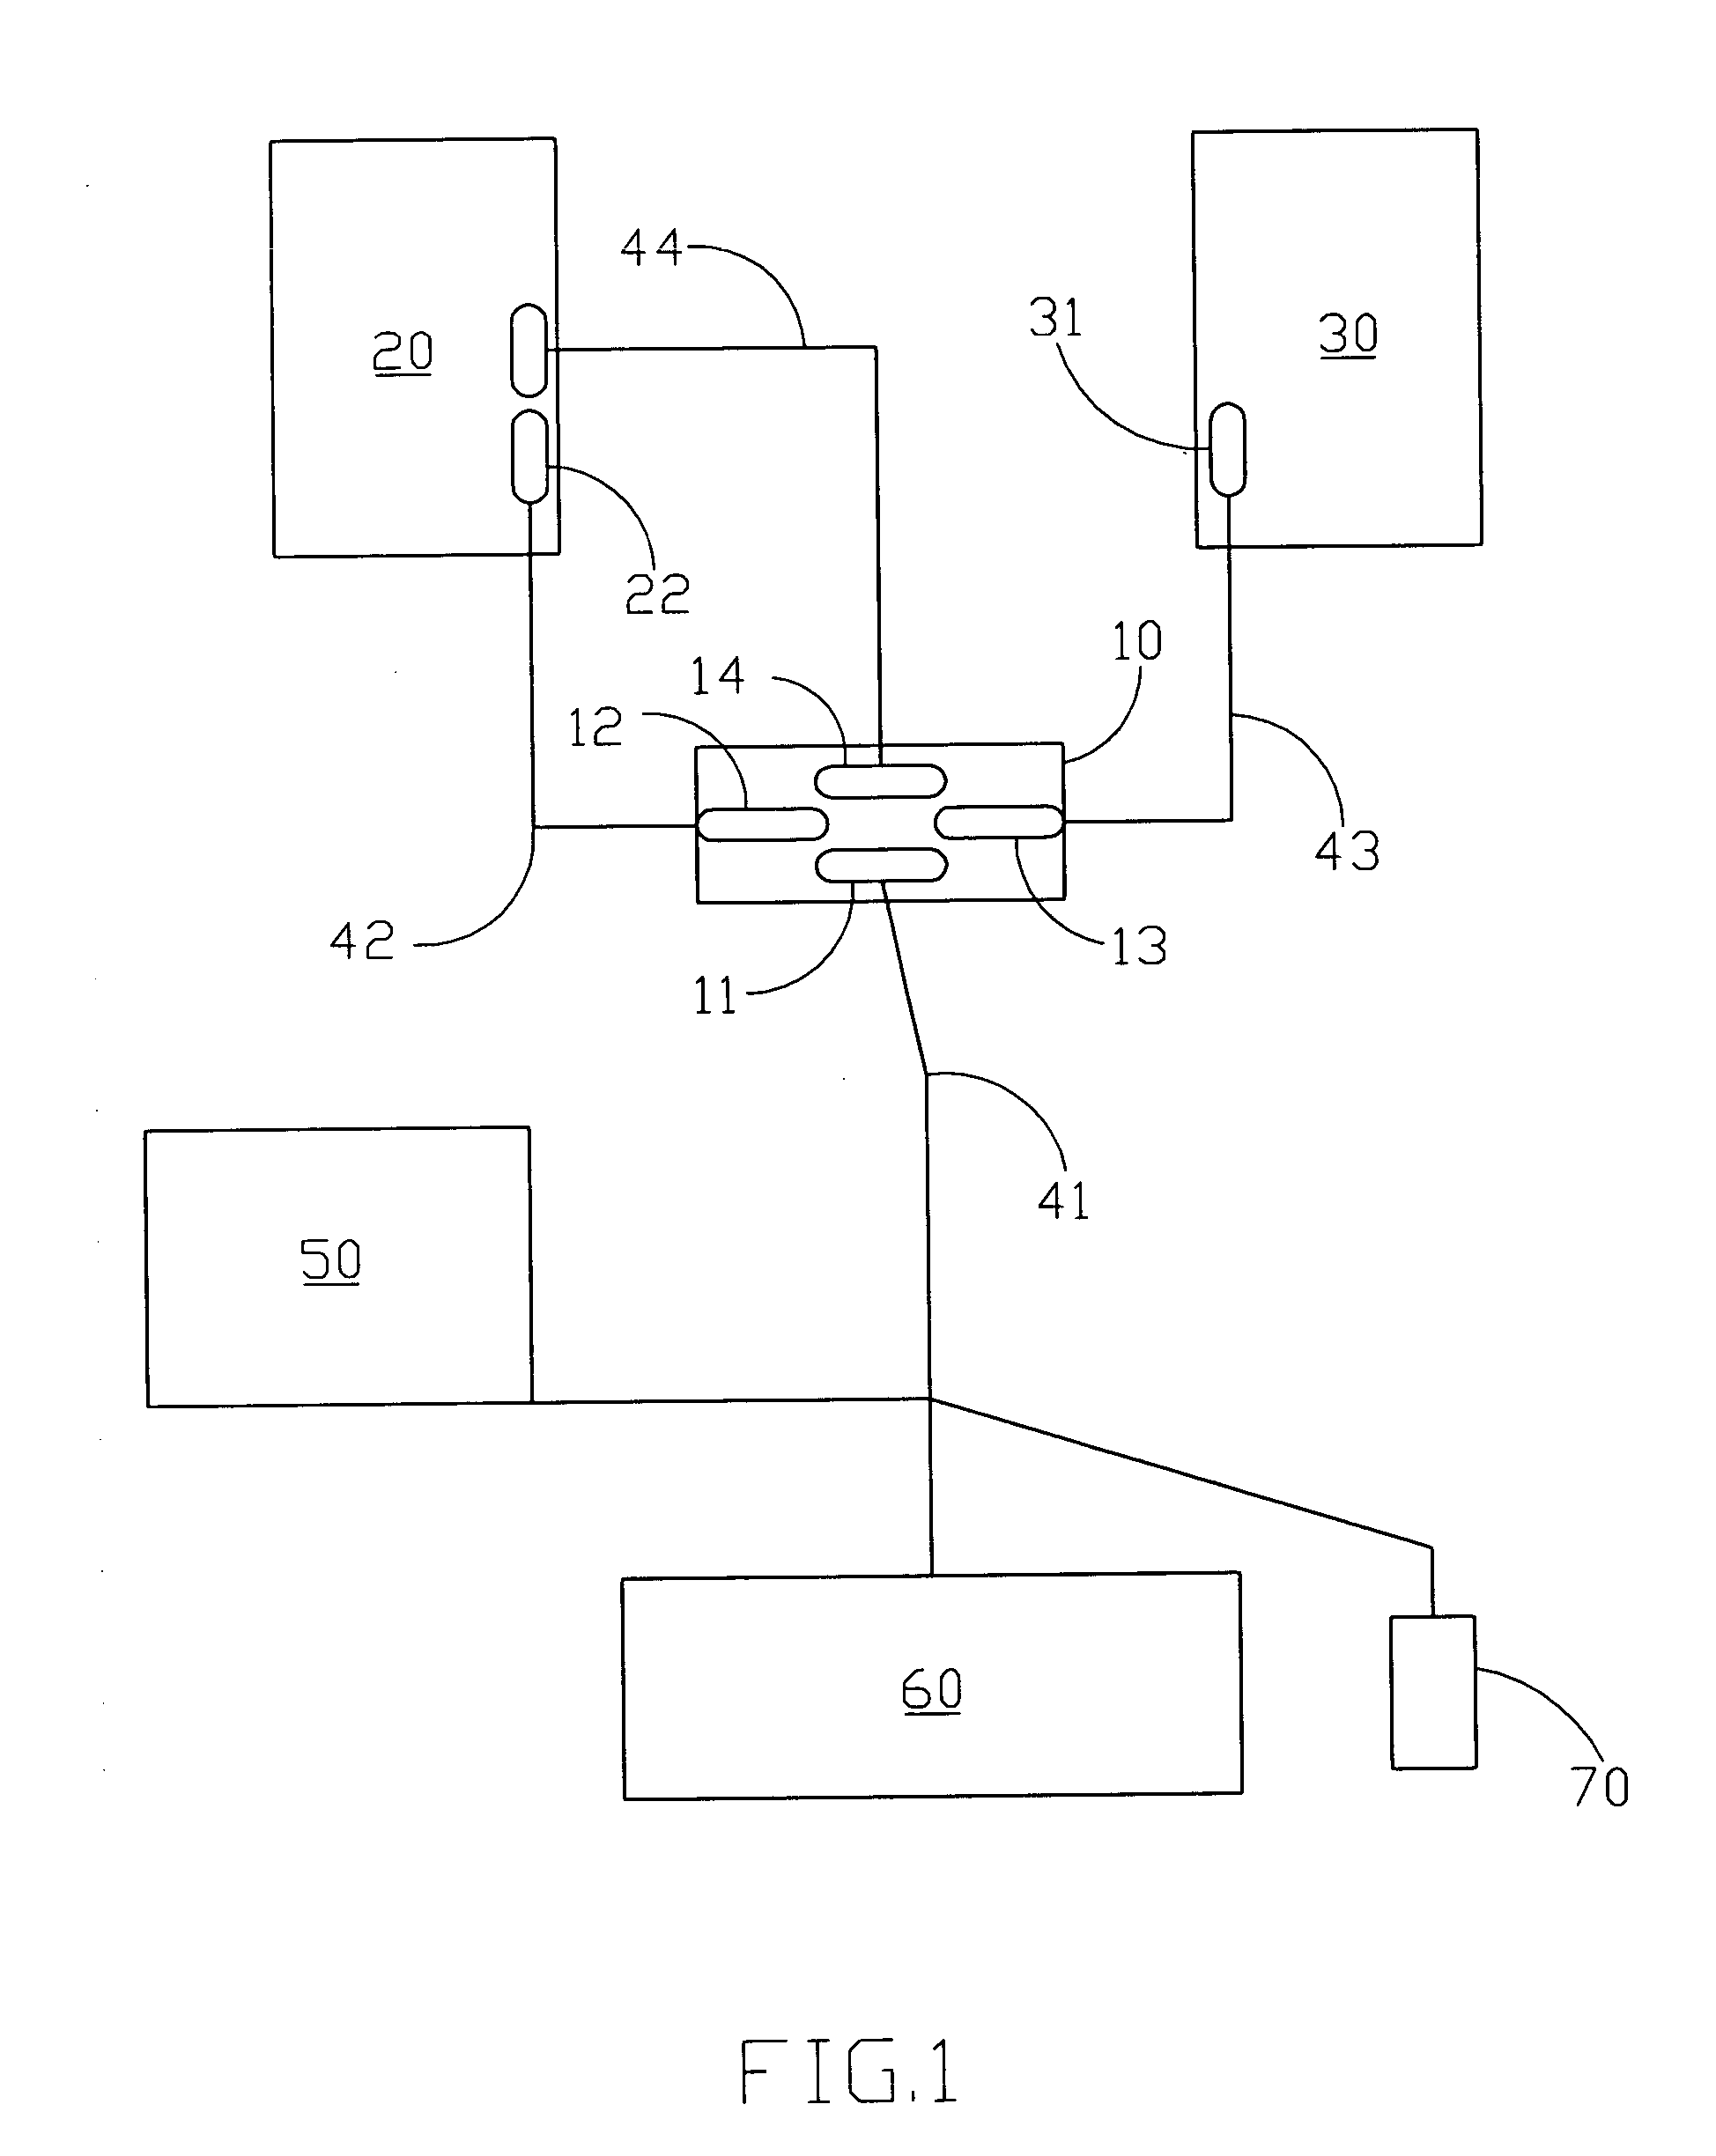 Peripheral community apparatus for computers output/input